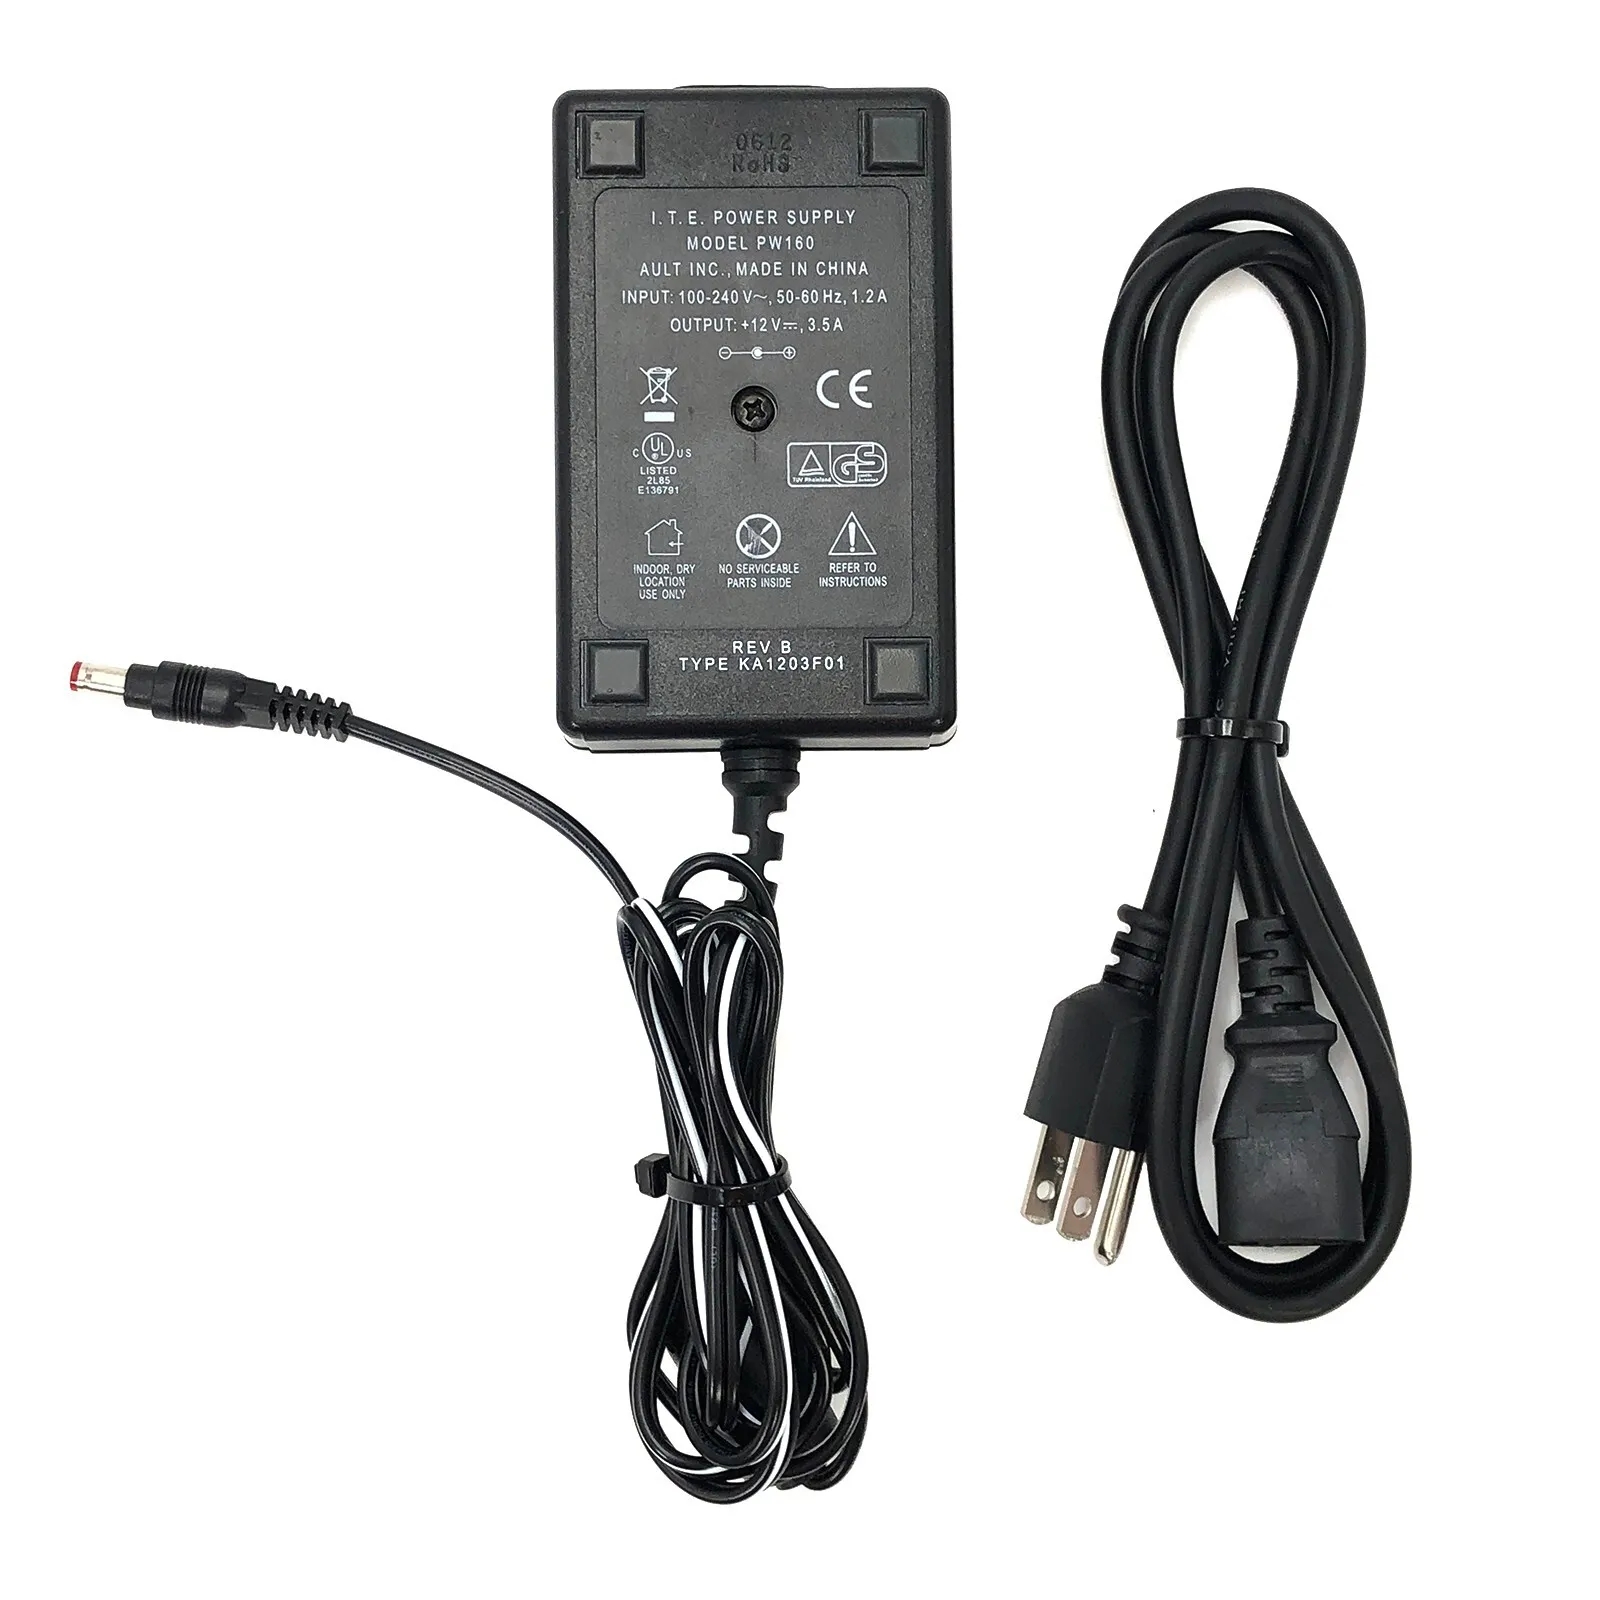 *Brand NEW*Genuine Ault 12V 3.5A AC Adapter PW160 Type KA1203f01 Power Supply